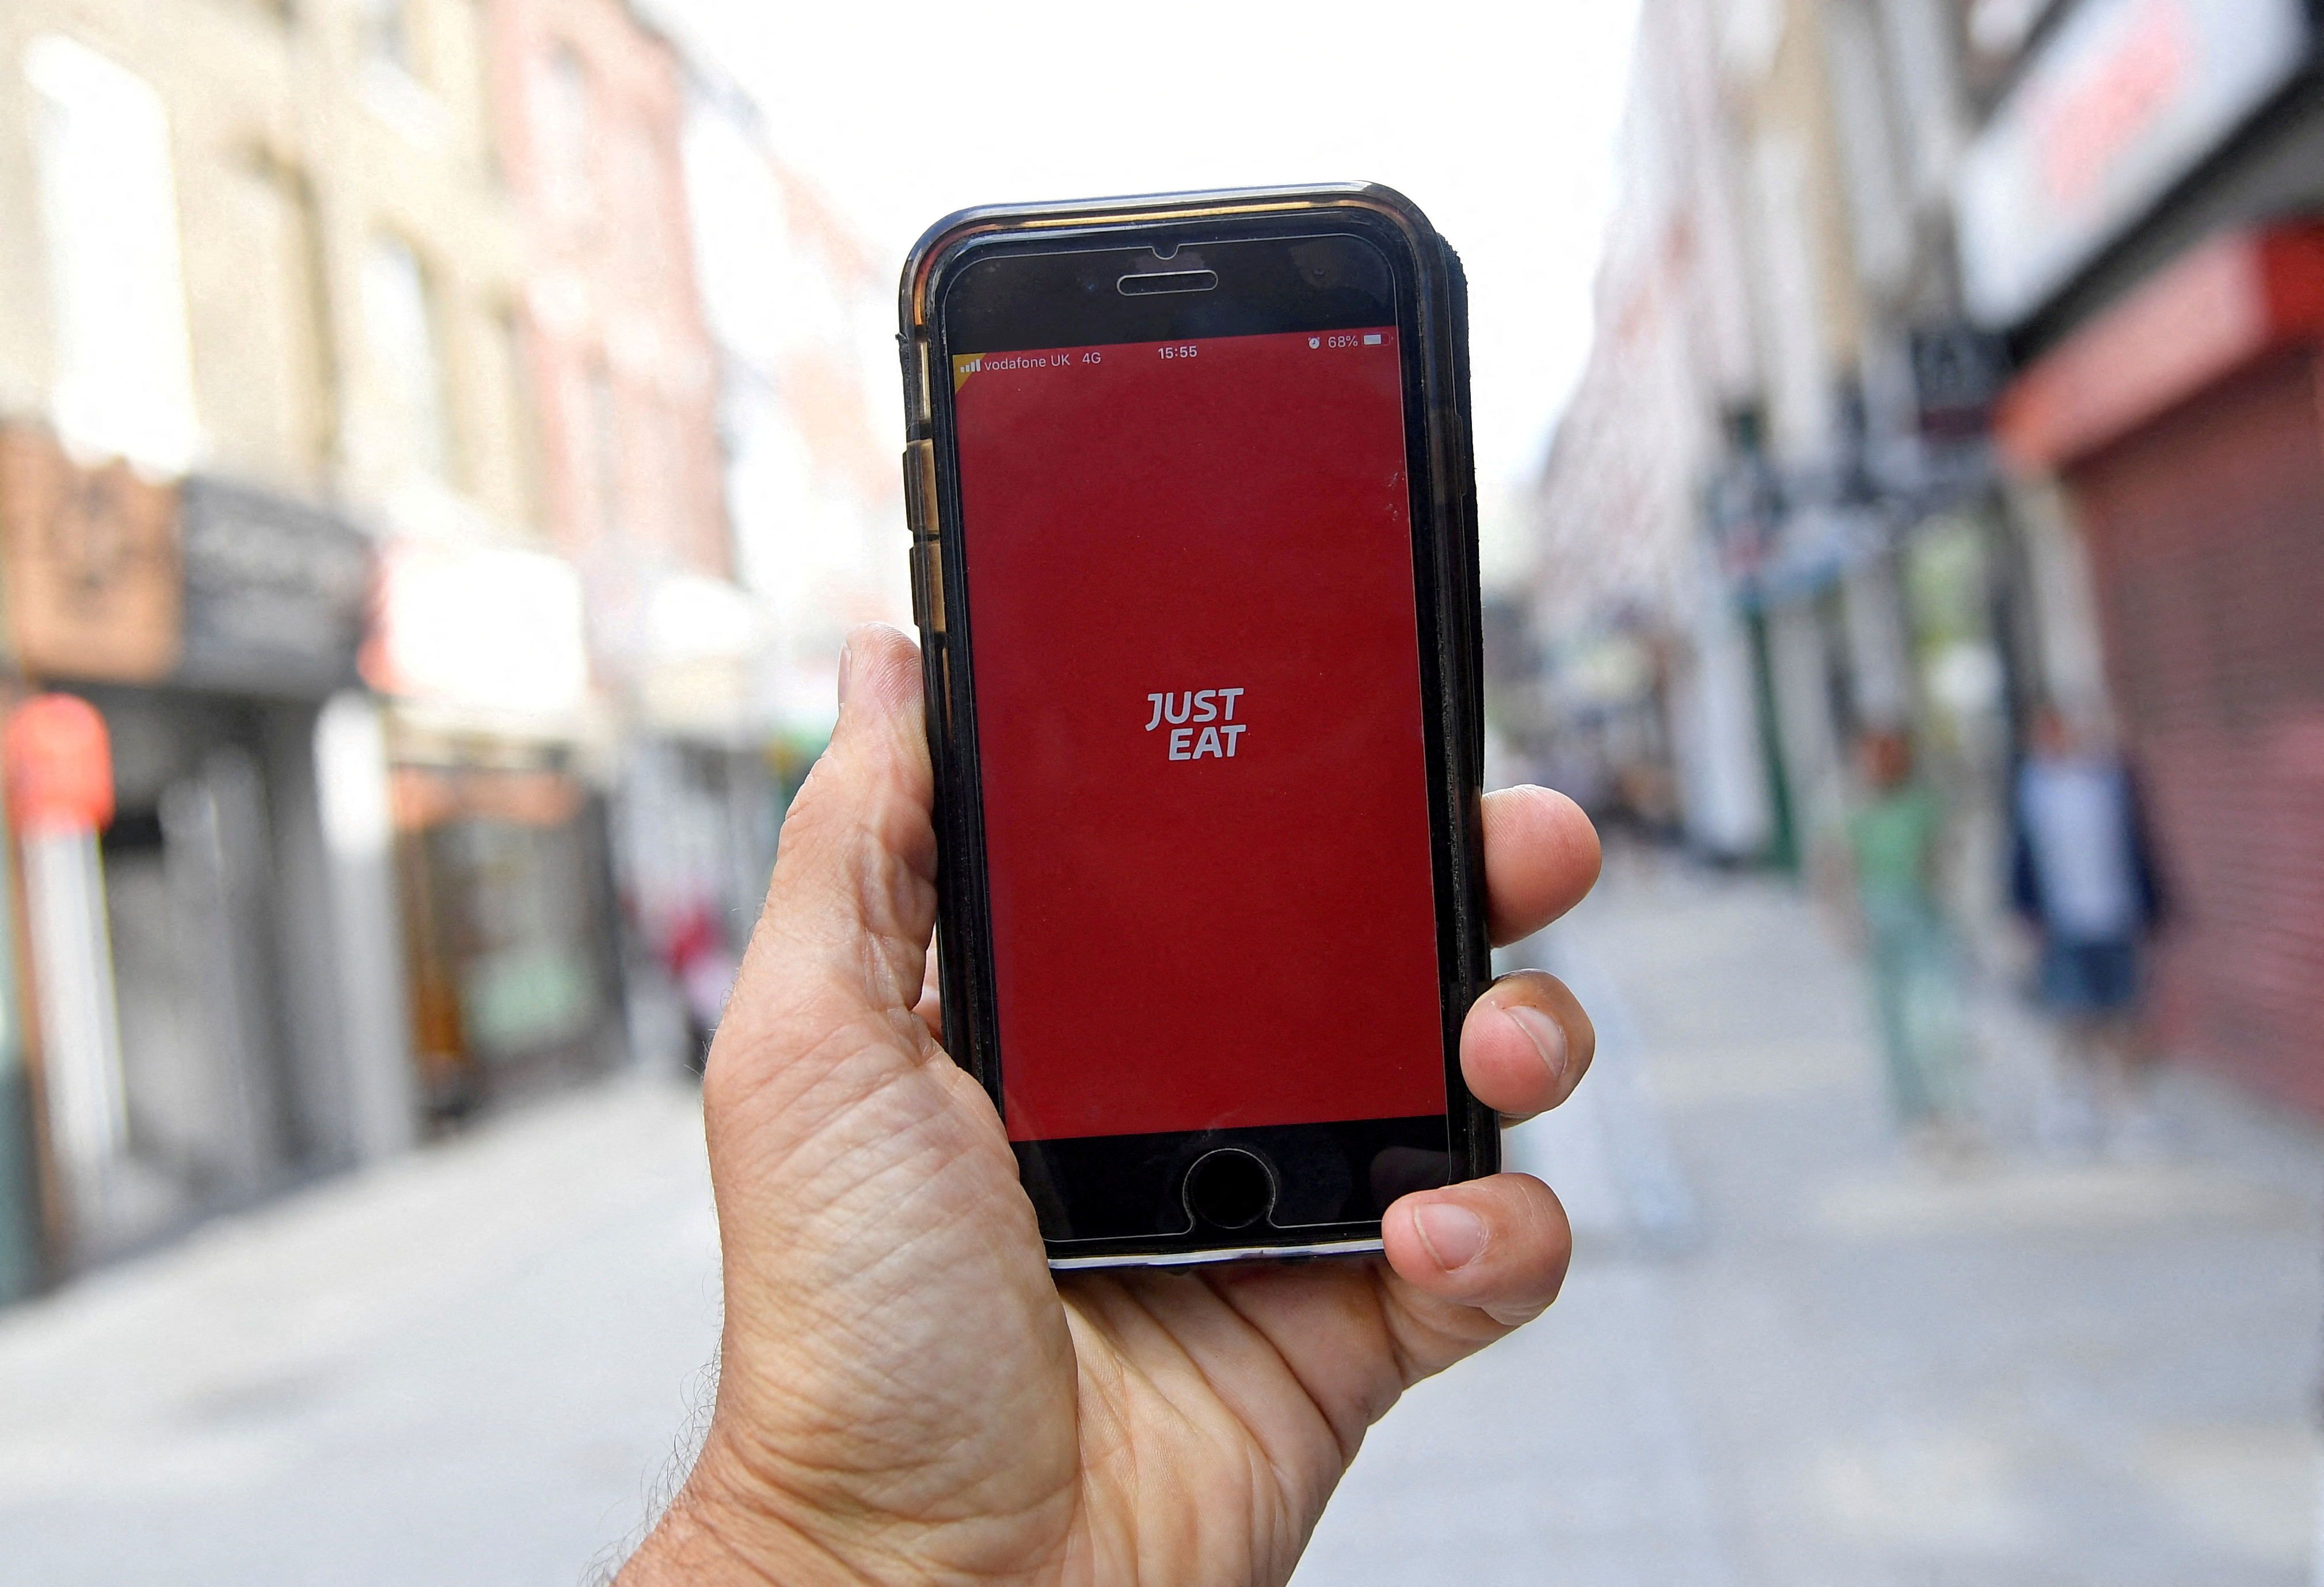 The app for Just Eat is displayed on a smartphone in London